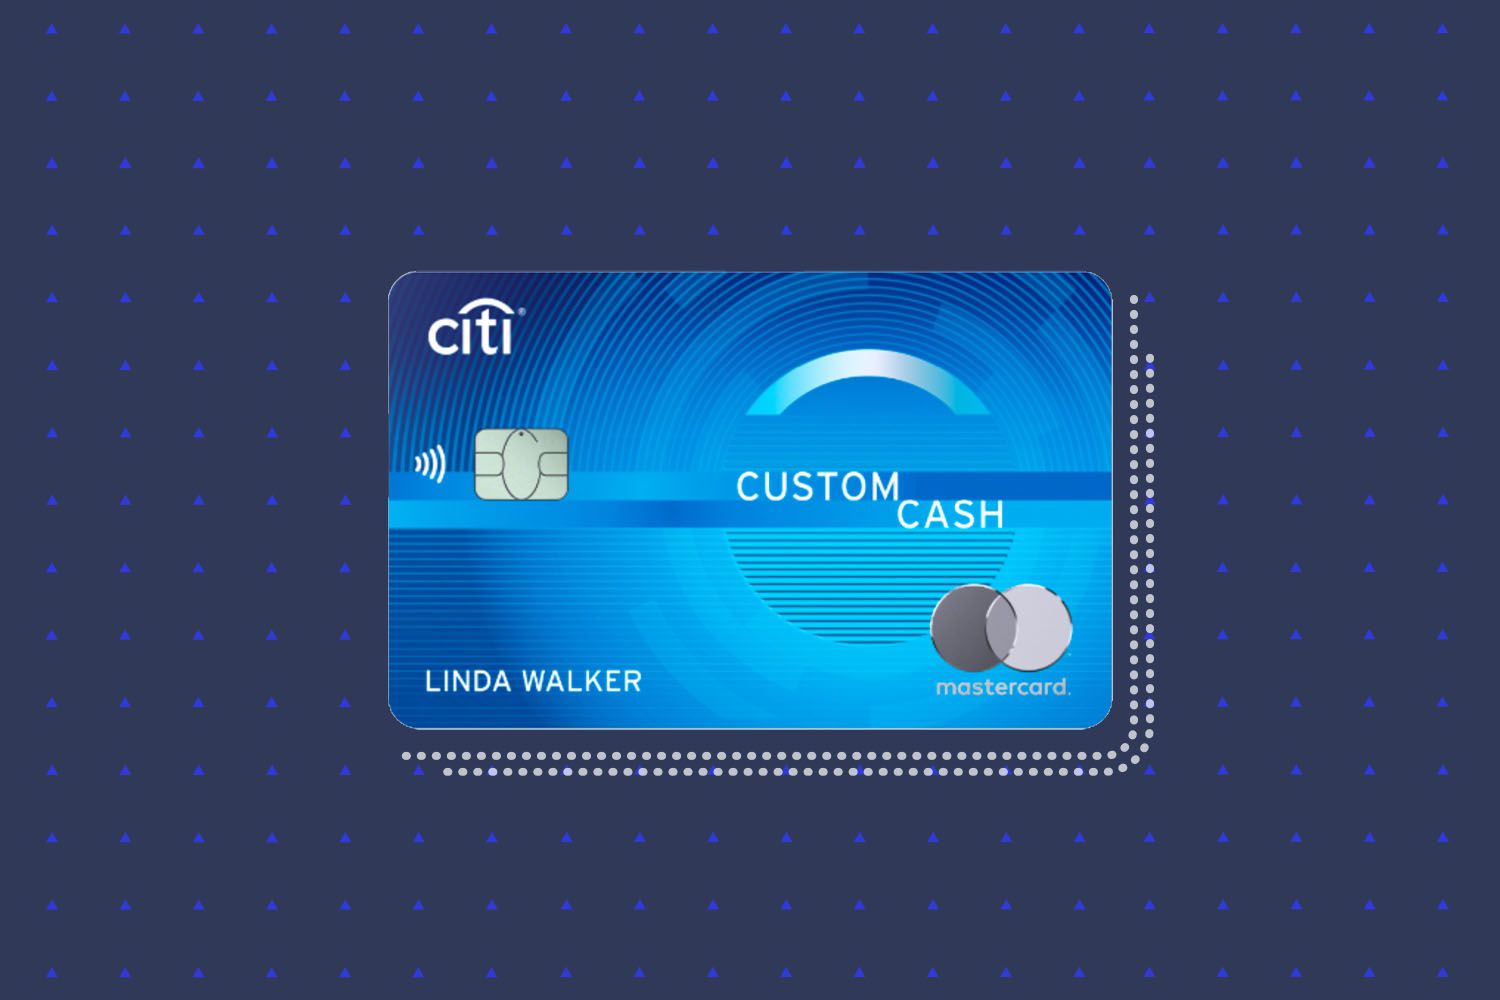 Here is our overview of the Citi Custom Card. Source: Investopedia